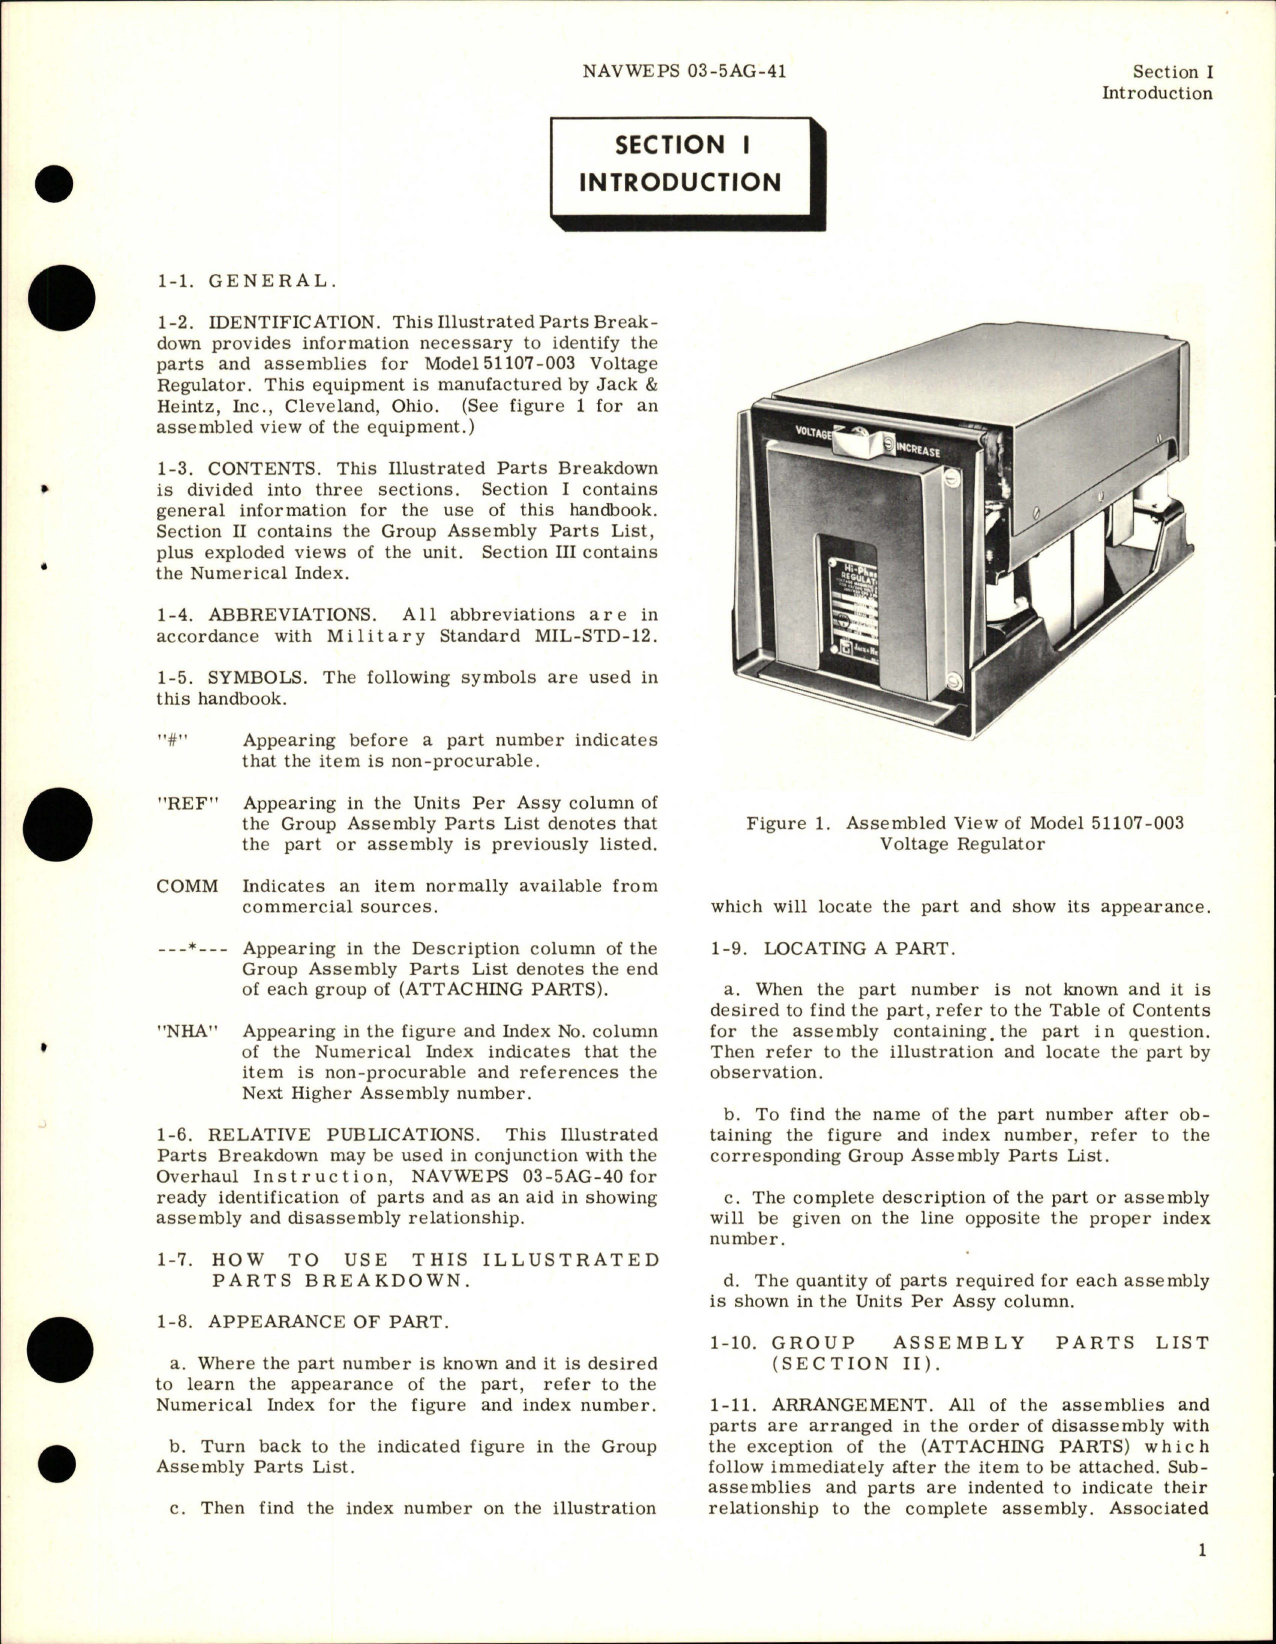 Sample page 5 from AirCorps Library document: Illustrated Parts Breakdown for Voltage Regulator - Model 51107-003 